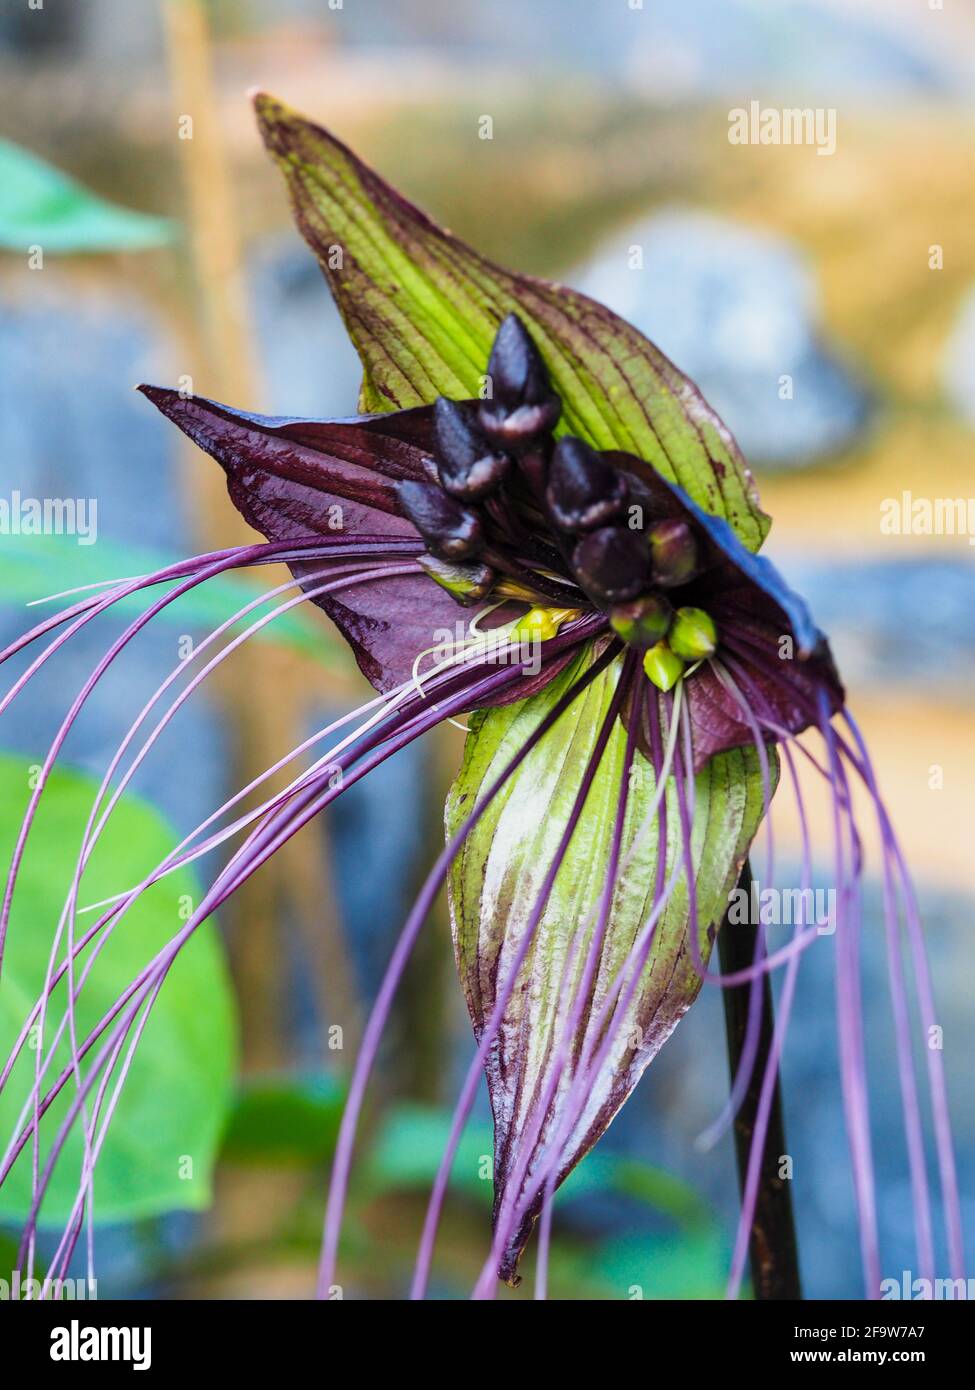 The weird, unusual and strangely beautiful Bat flower plant or Tacca Chantrieri, with two bracts resembling bat's wings and whisker-like Bracteoles Stock Photo